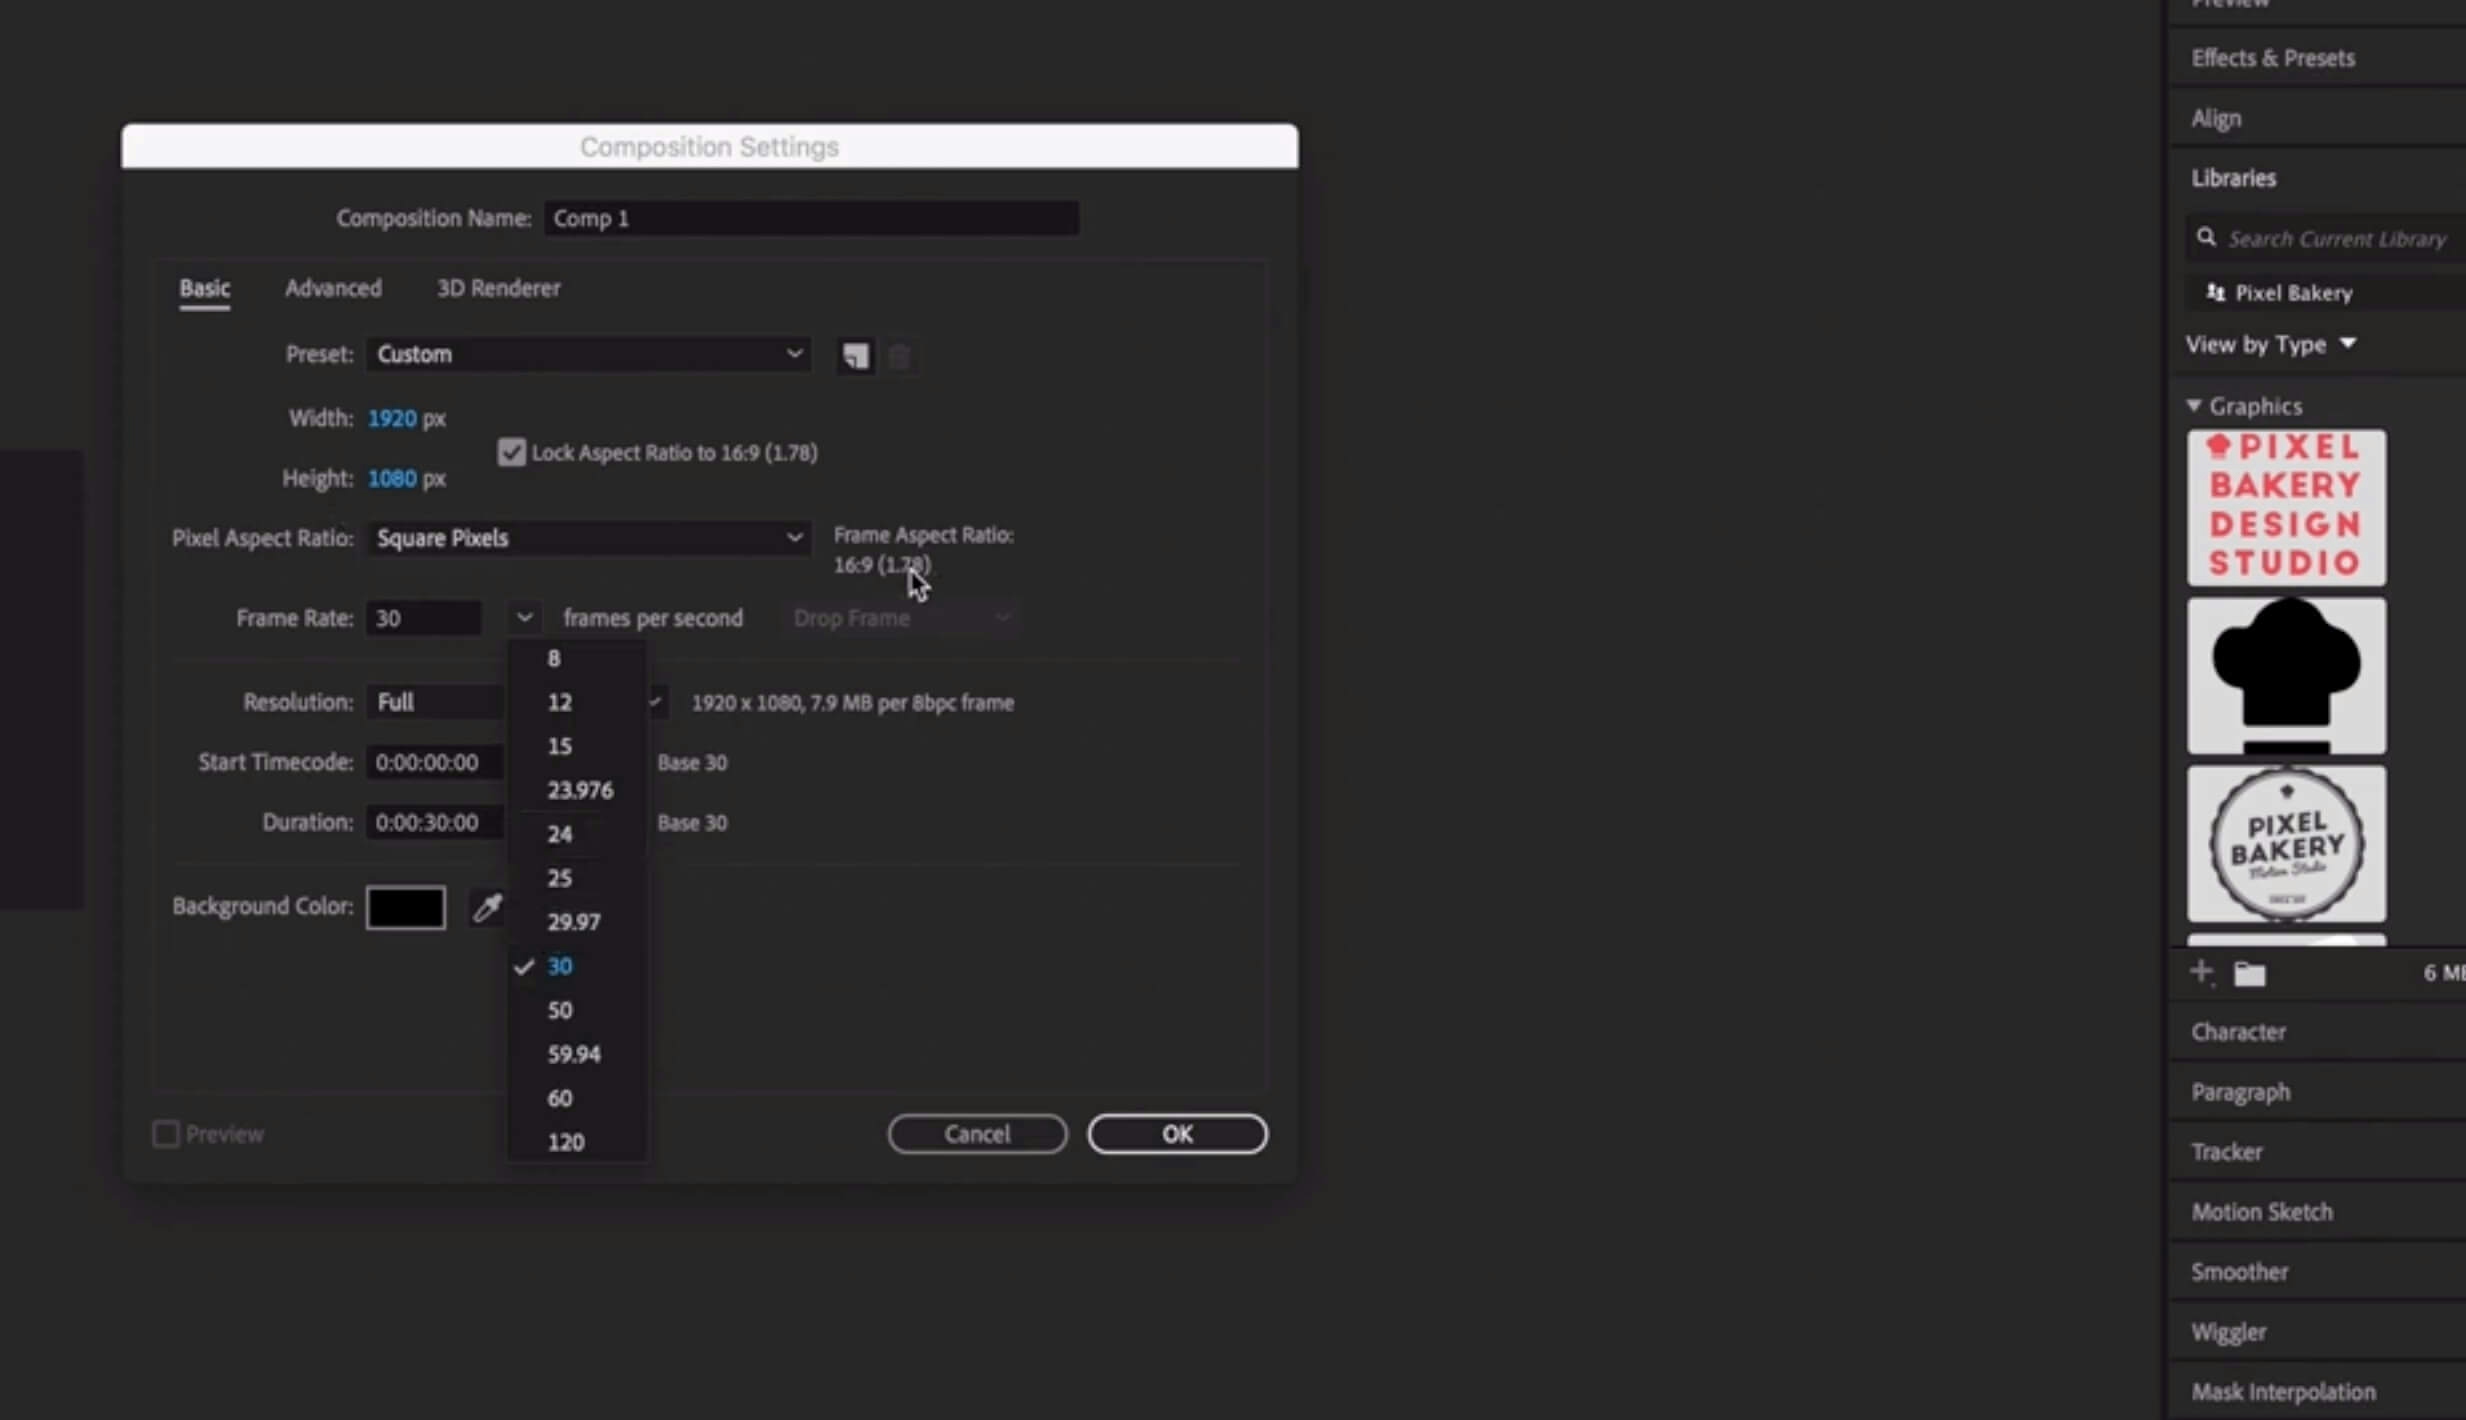 Tutorial: Composition Settings in After Effects, by Jordan Lambrecht